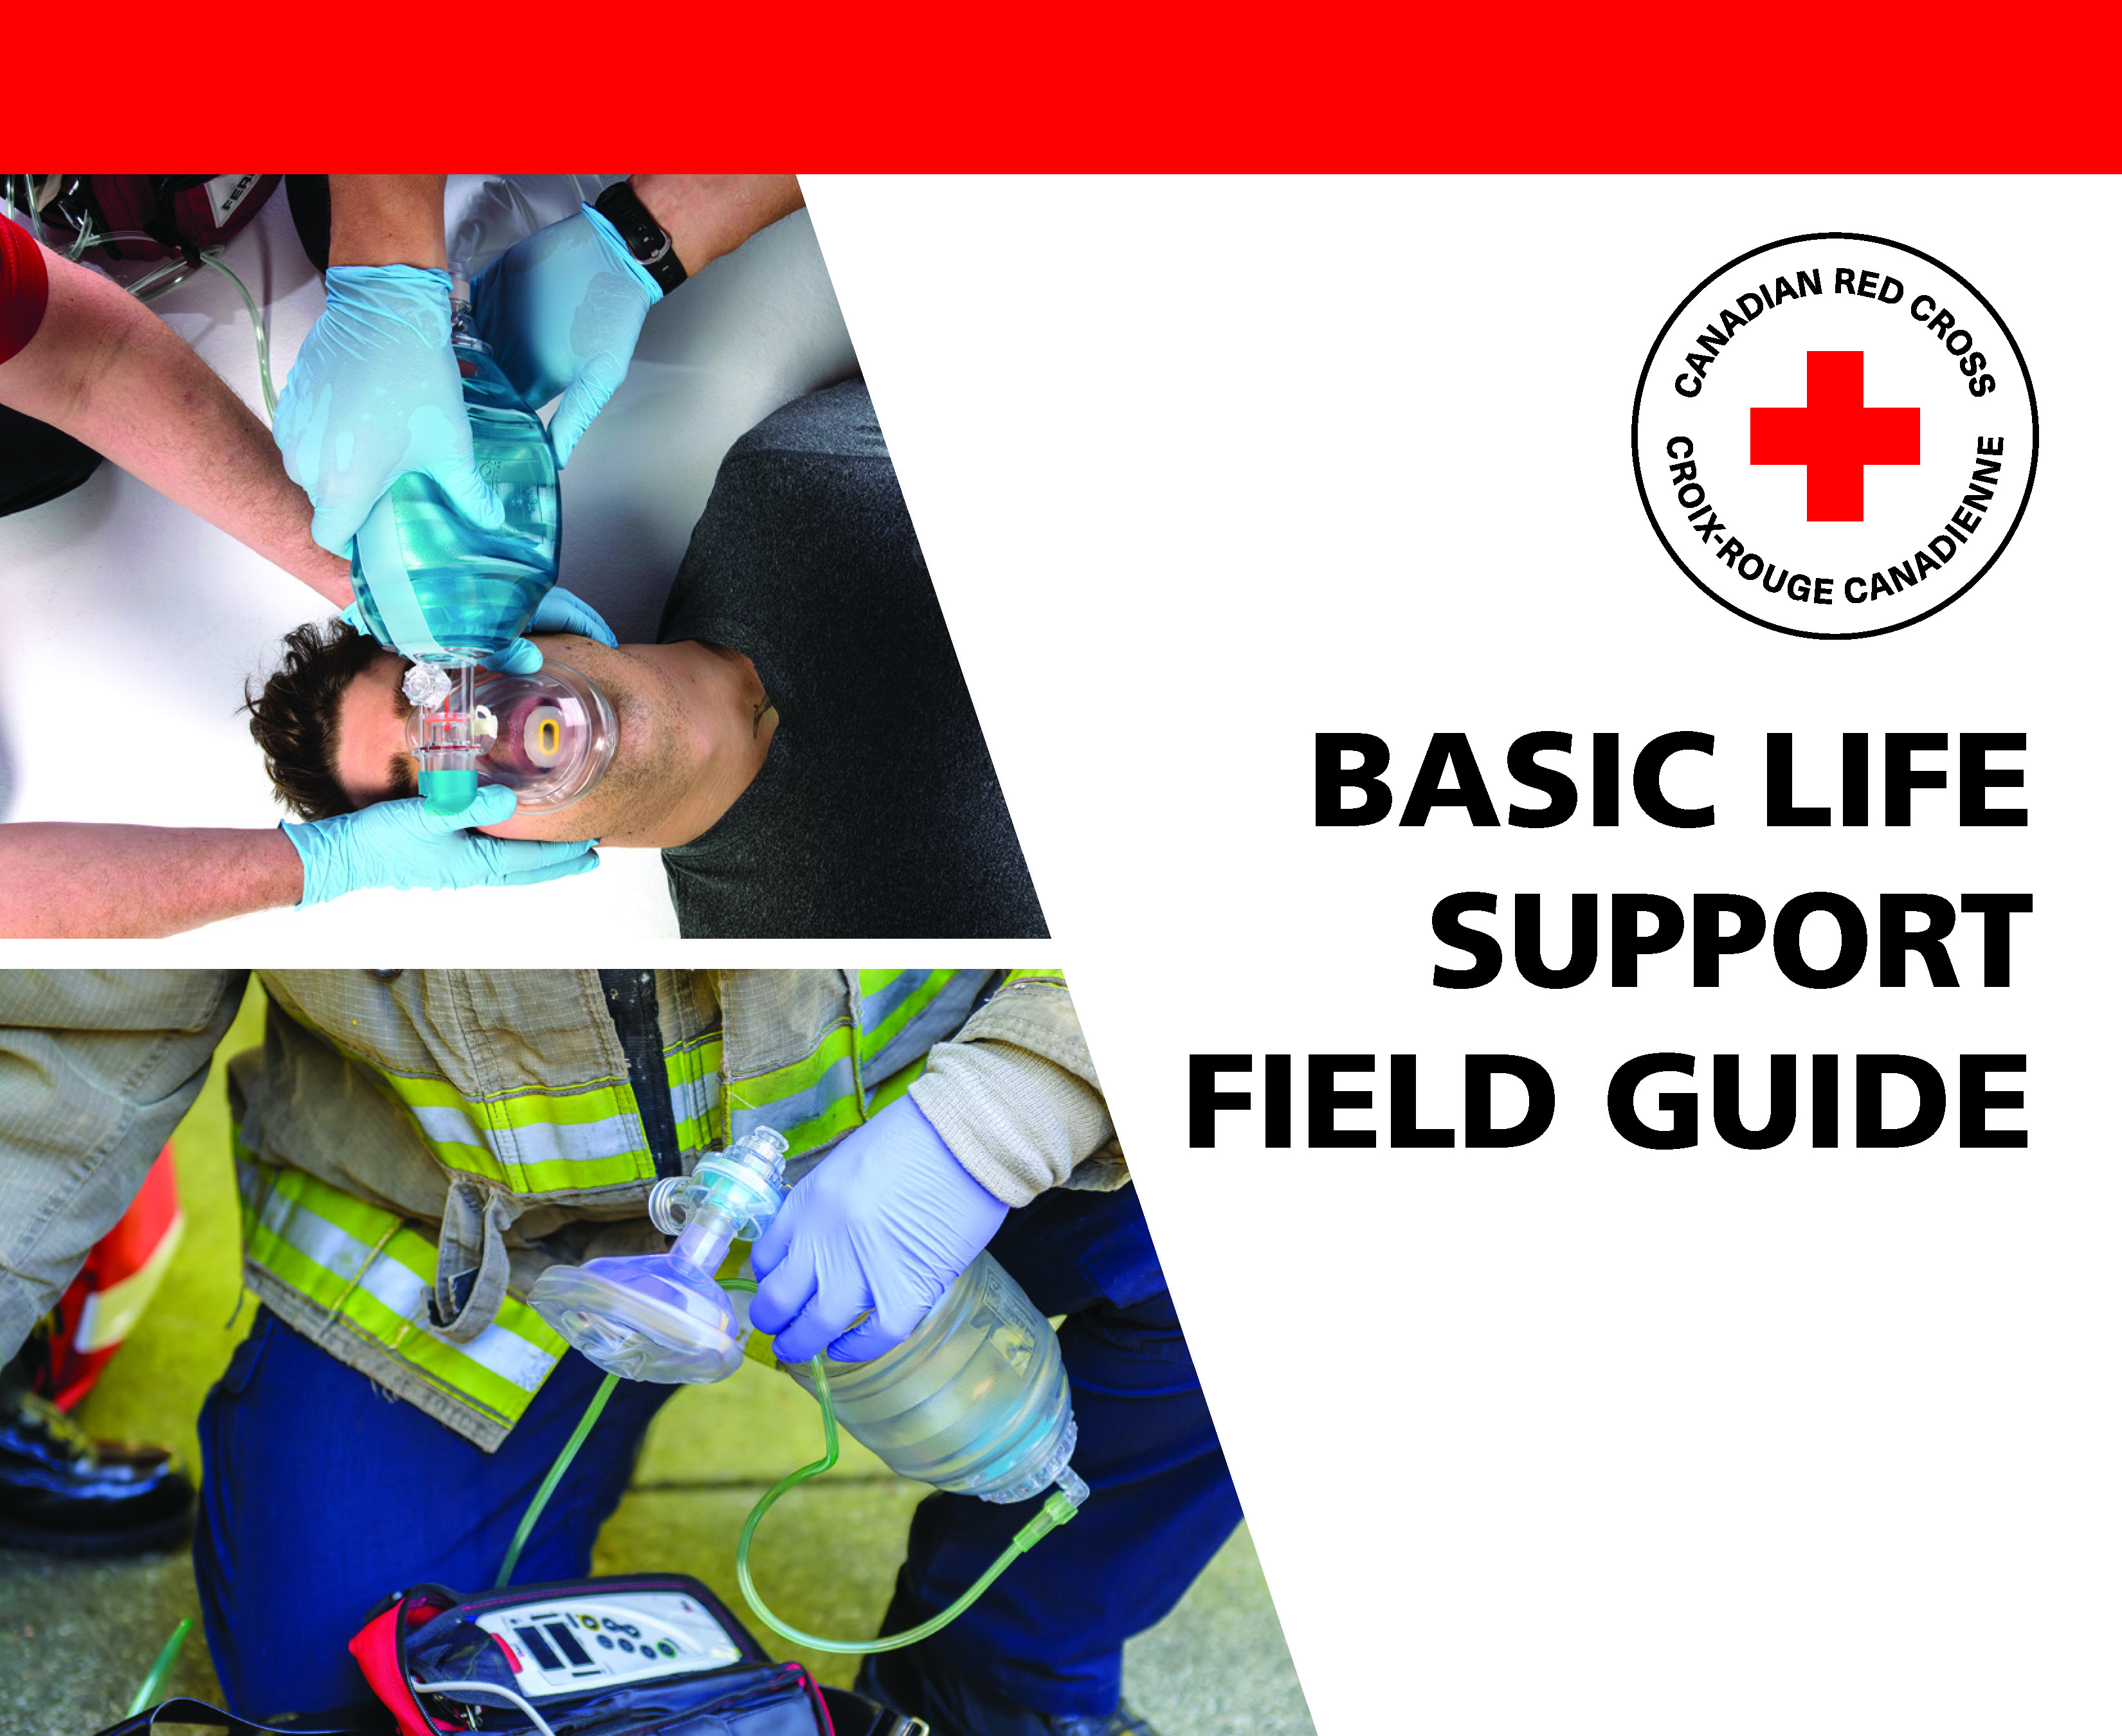 Basic Life Support Field Guide (English)